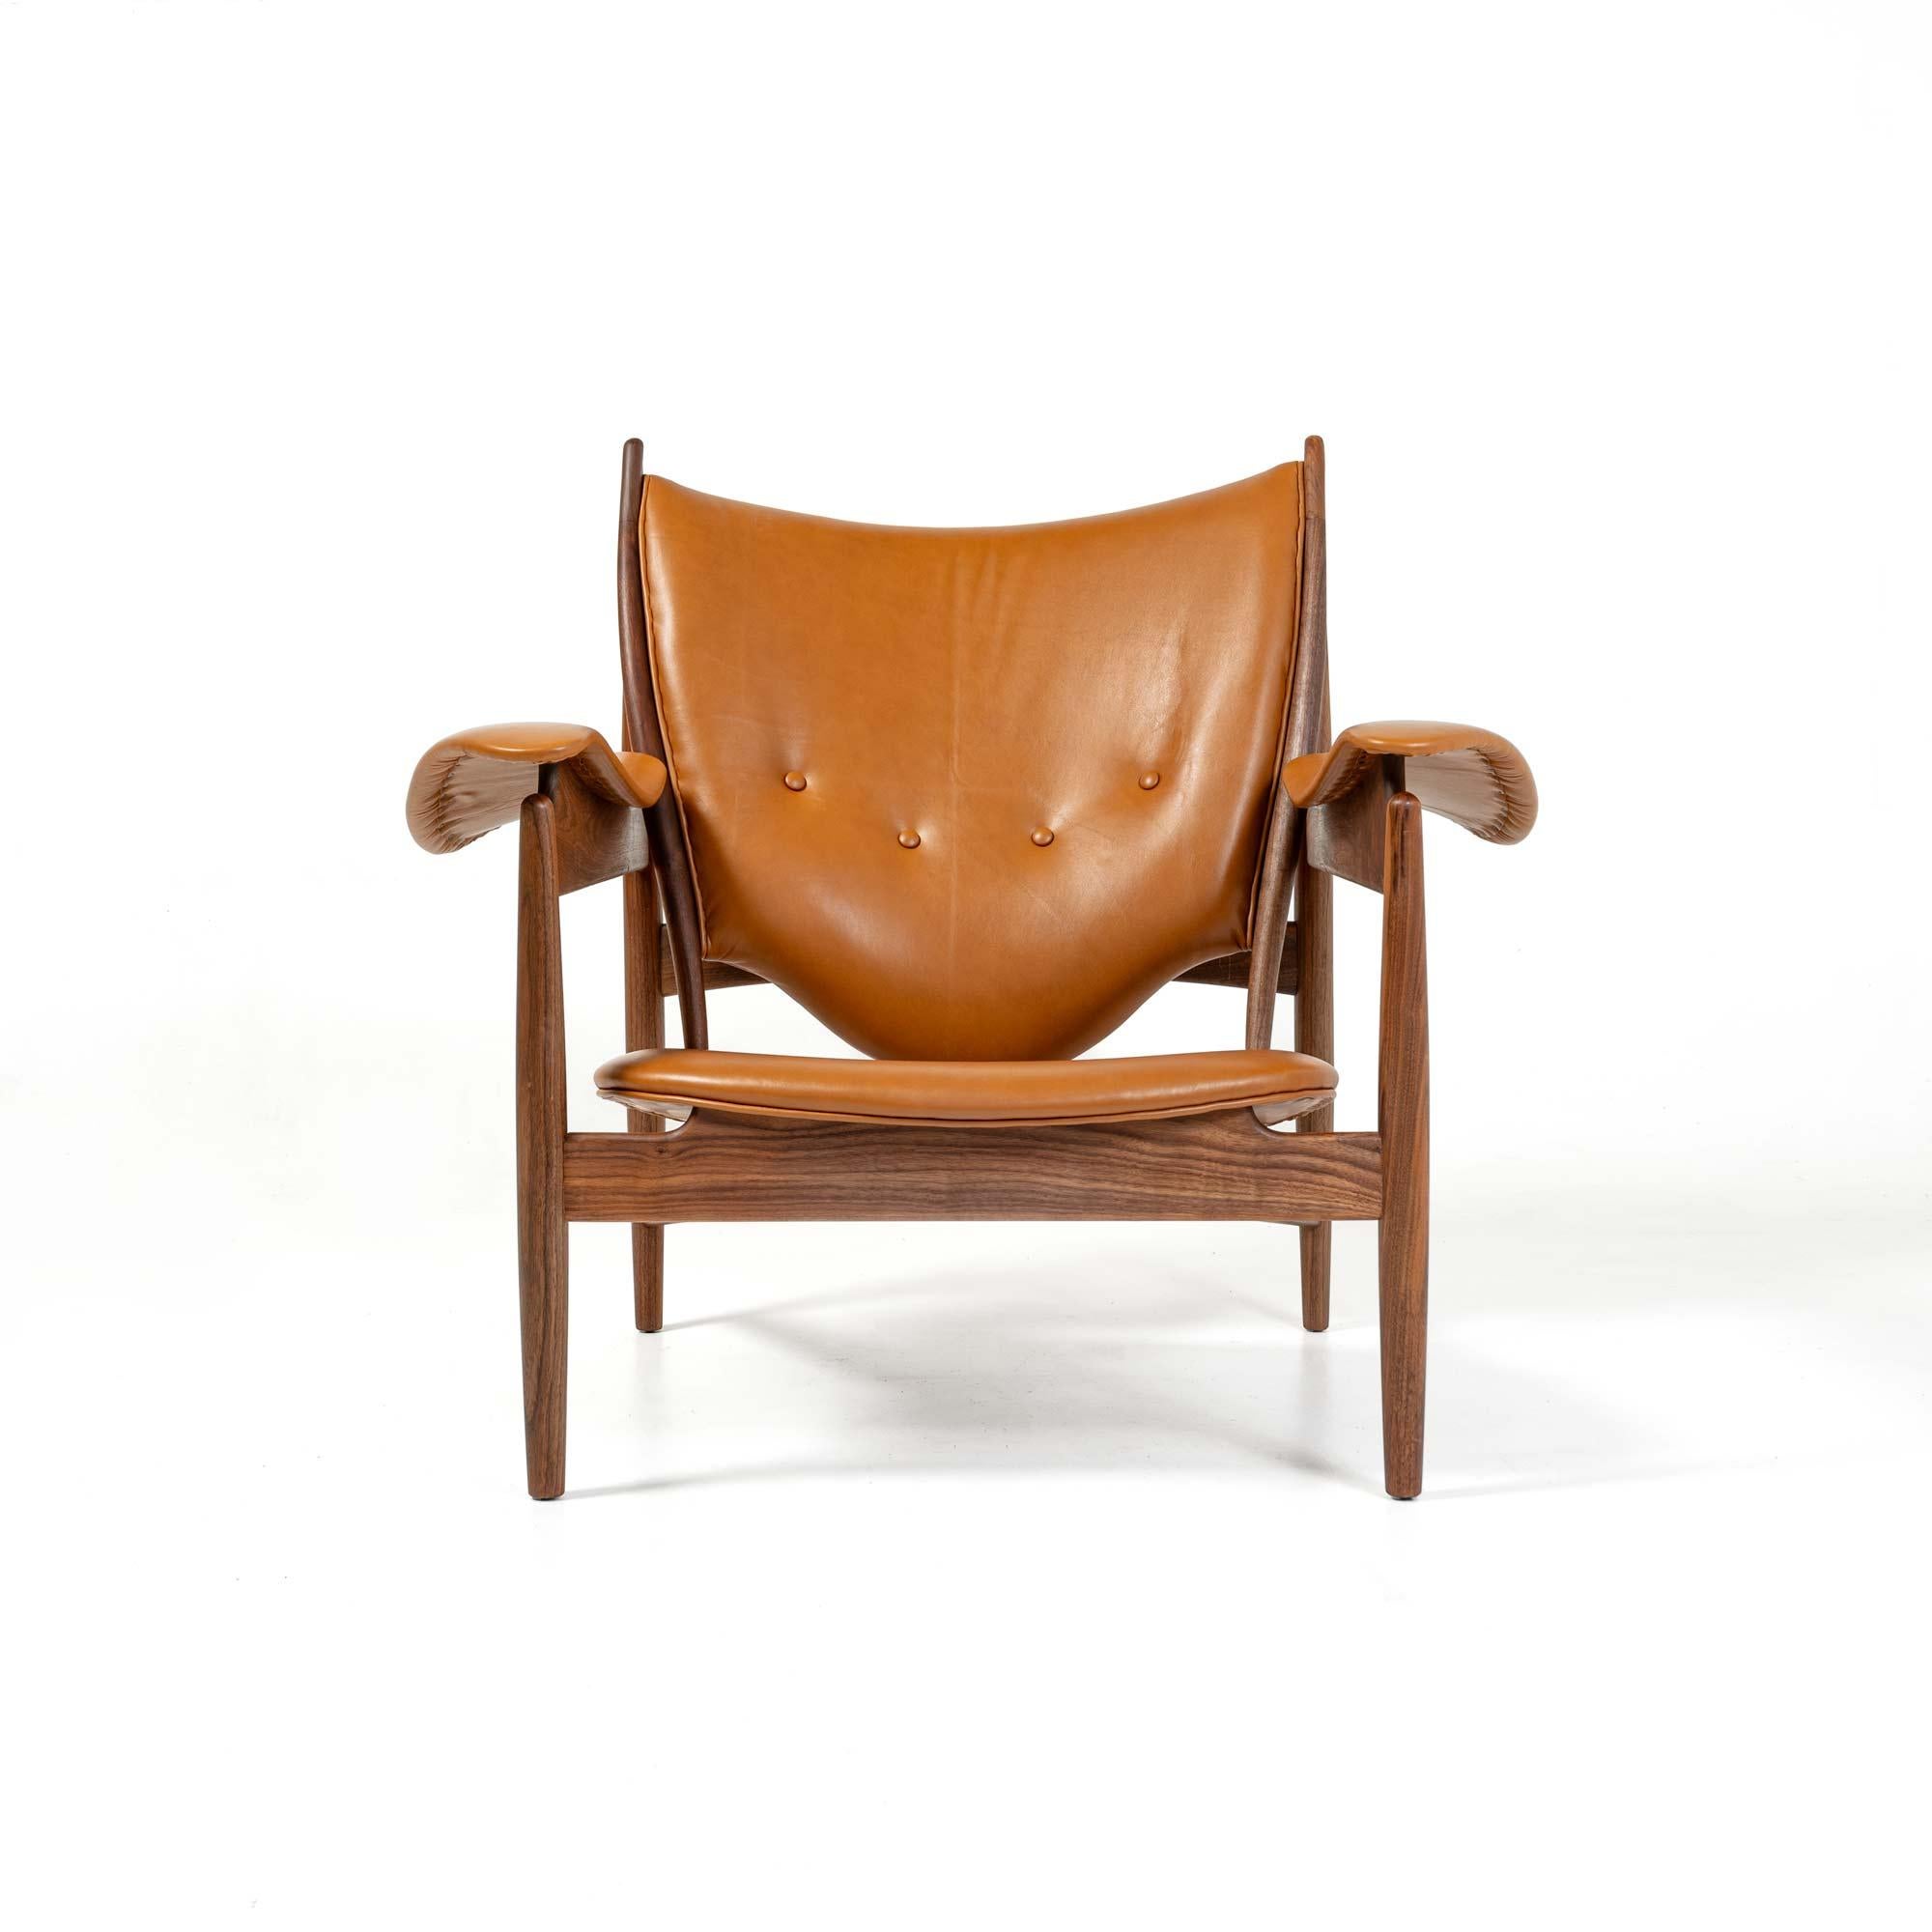 The Chieftain Chair is considered to be one of the most important designs by Finn Juhl. It was first presented at the Cabinetmakers Guild in 1949, and it is said that Denmark's King Frederik sat in it, hence the name. Baker Furniture USA was the